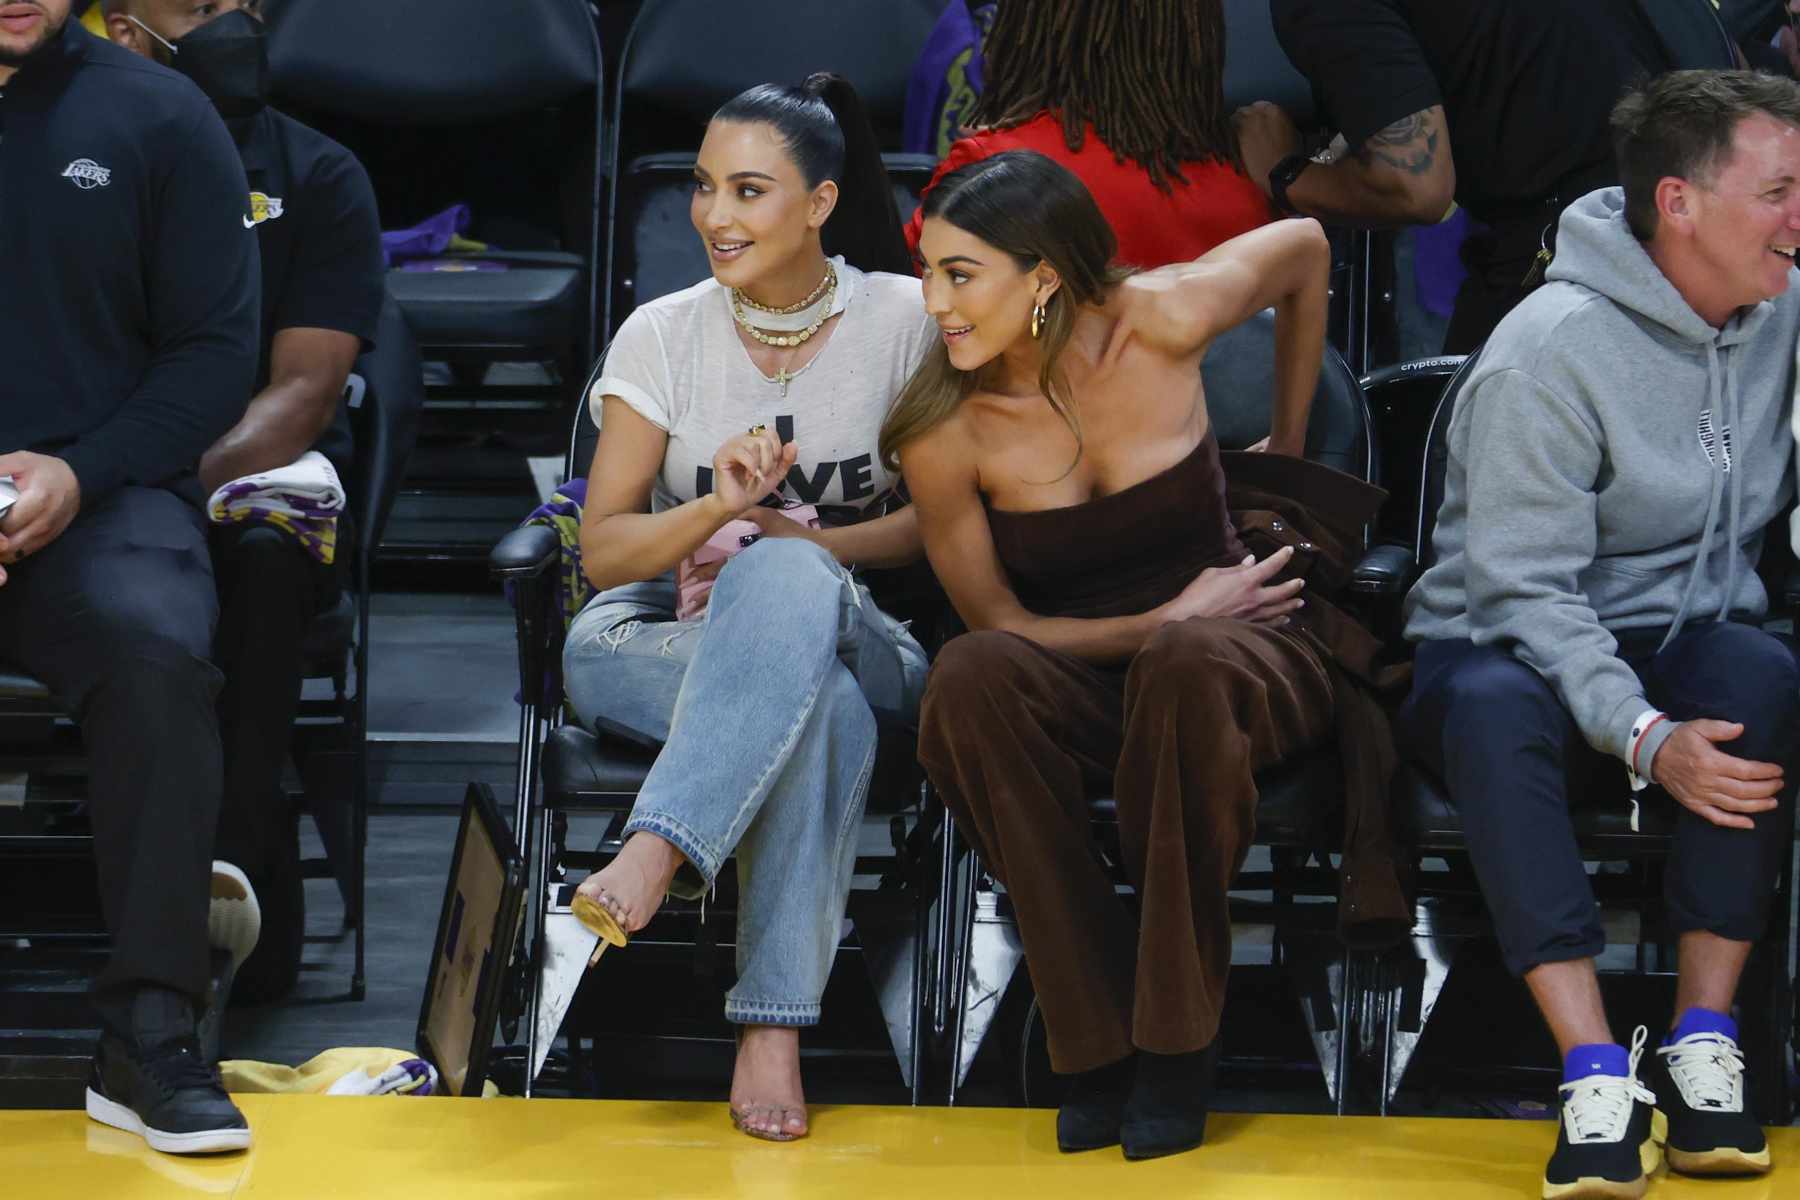 Kim K Is the Main Event at the NBA Playoffs